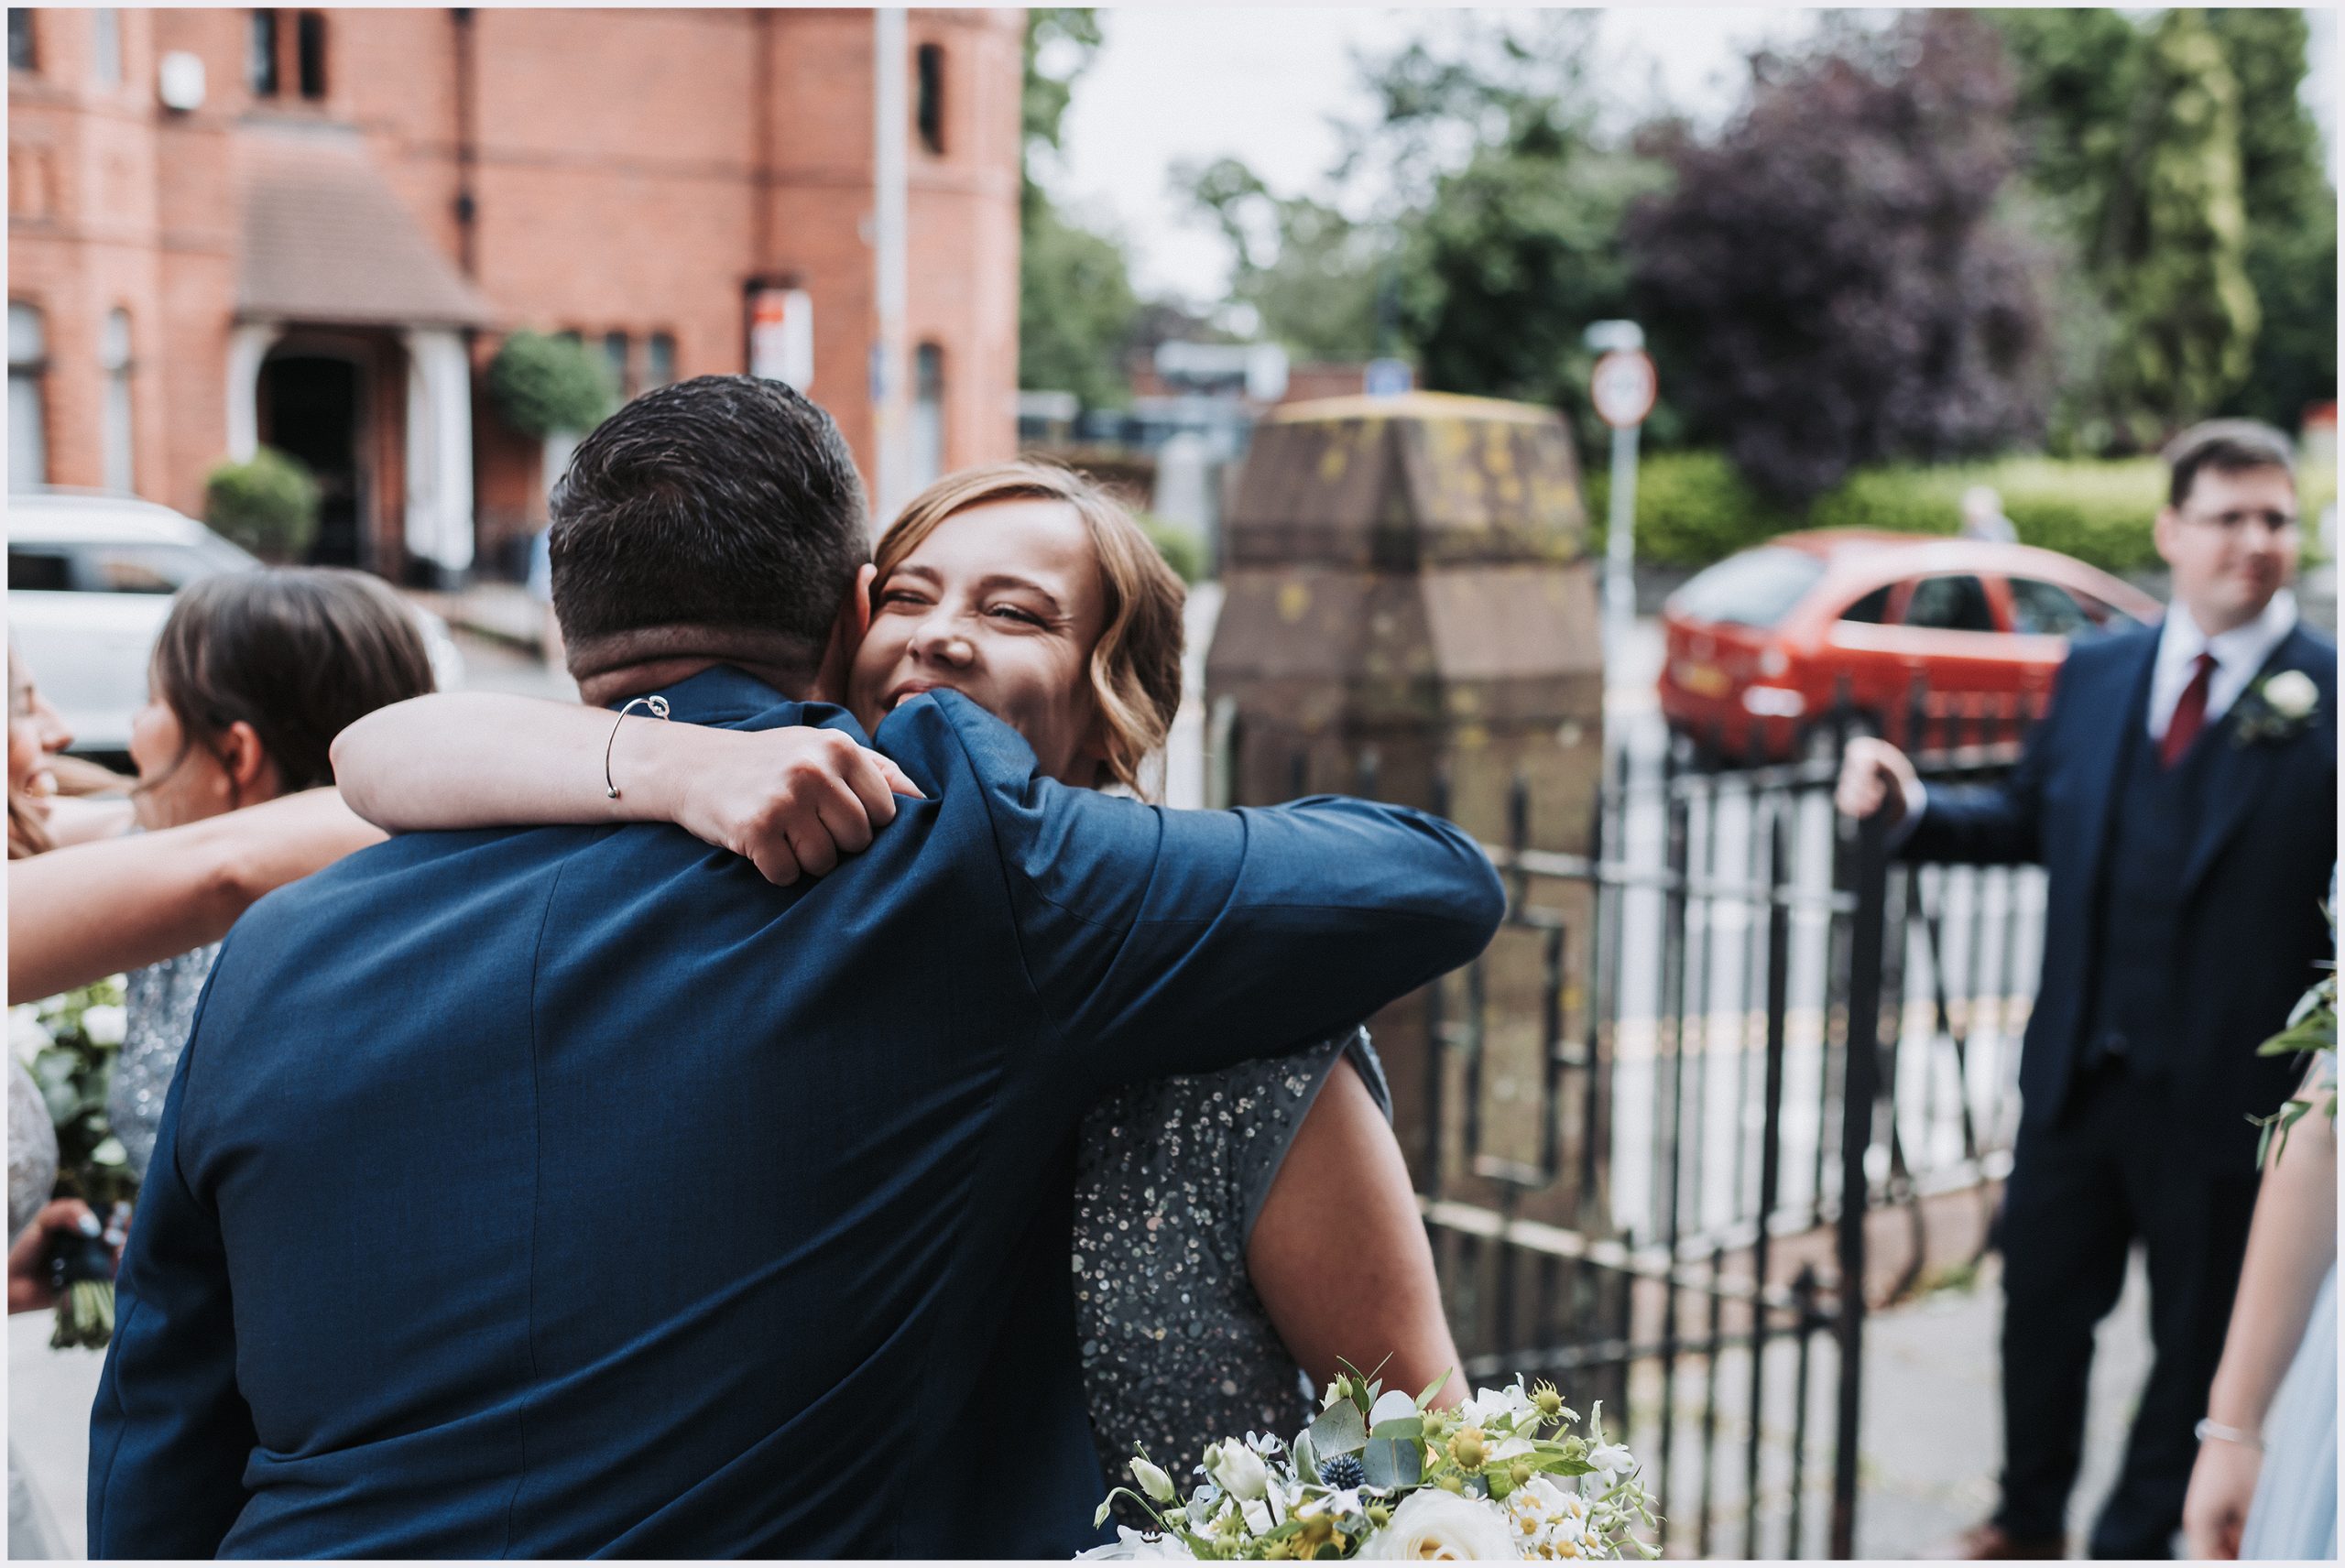 A bridesmaid hugs the groom congratulating him after their church wedding ceremony.  Image captured by North Wales wedding photographer Helena Jayne Photography